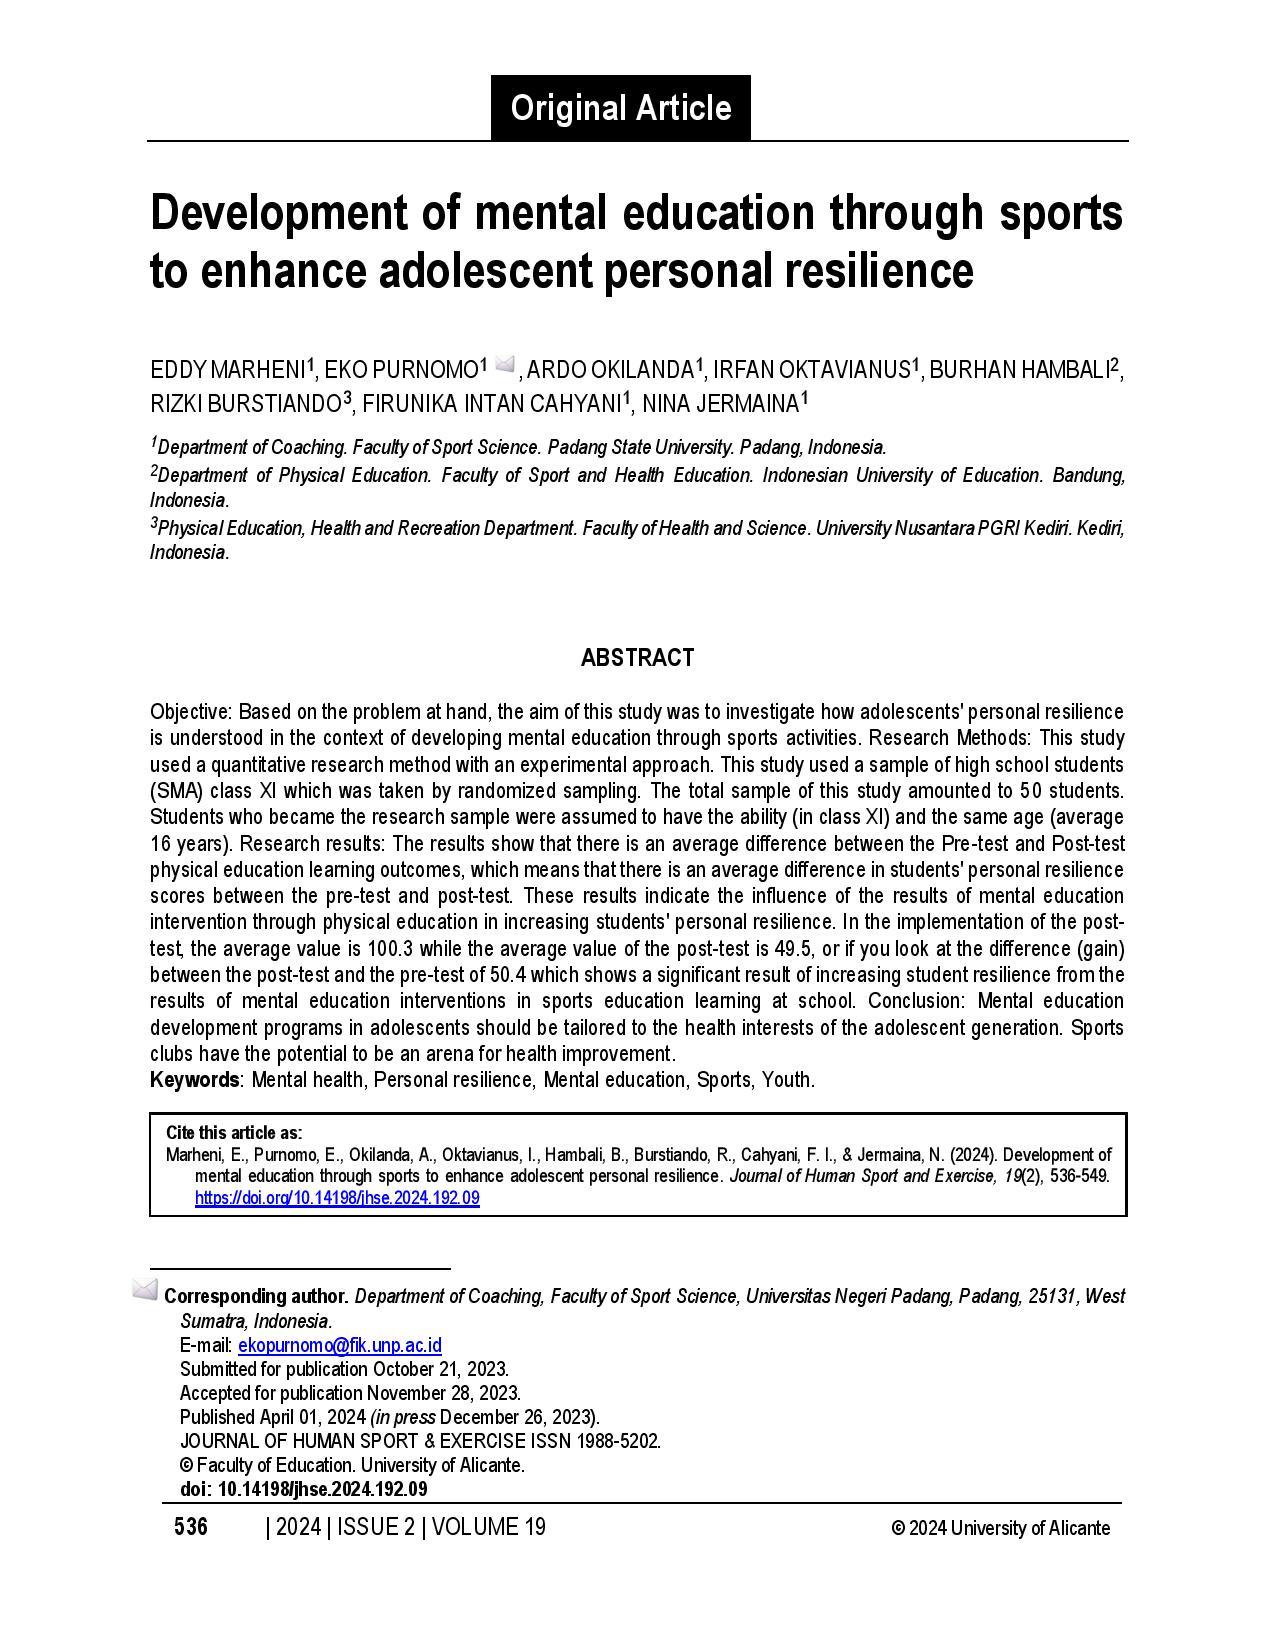 Development of mental education through sports to enhance adolescent personal resilience